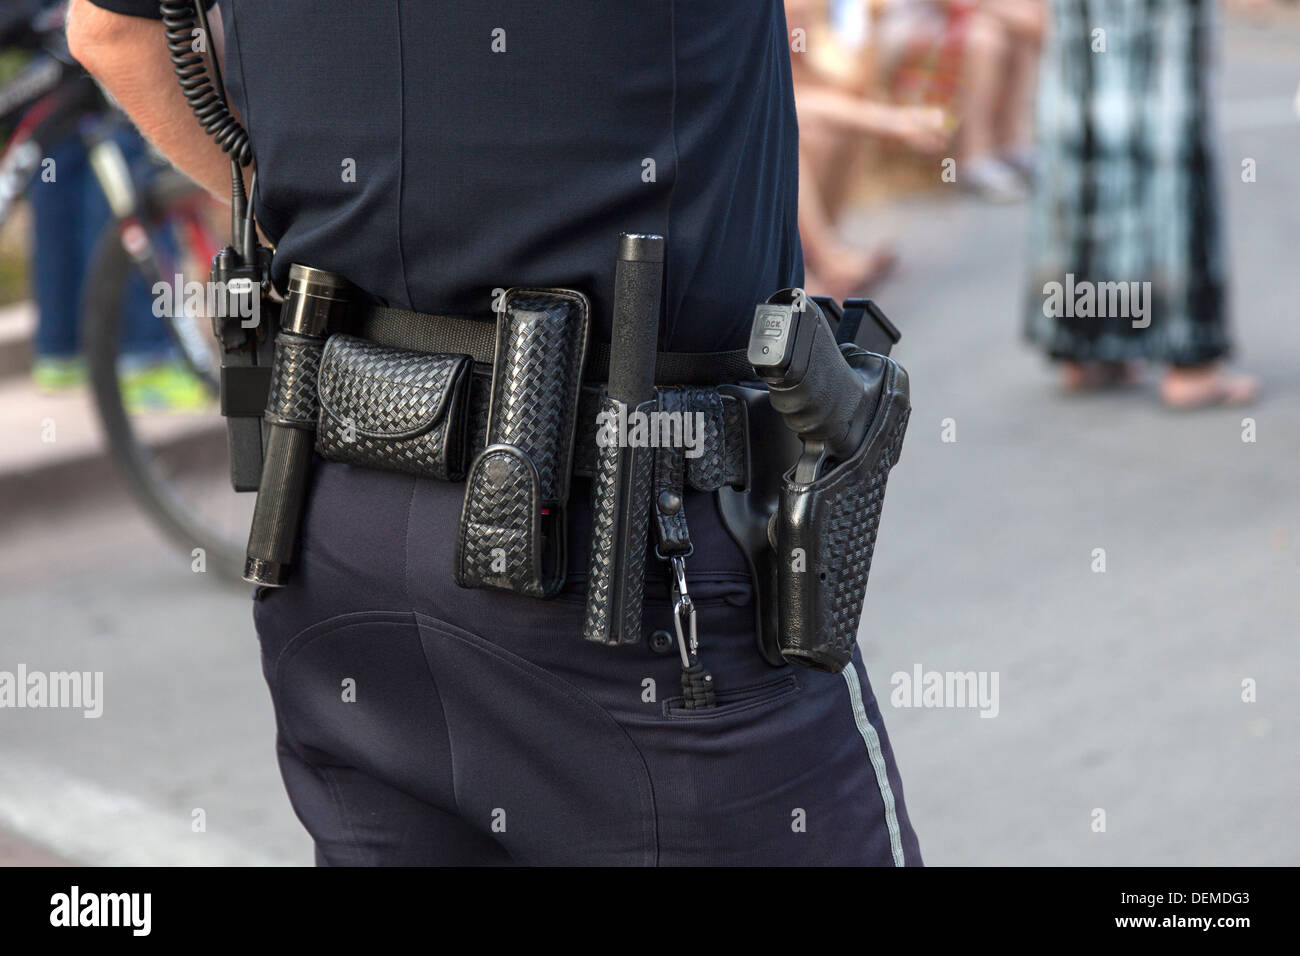 Equipment belt of an American uniformed Police Office showing his gun and baton, Colorado, USA Stock Photo